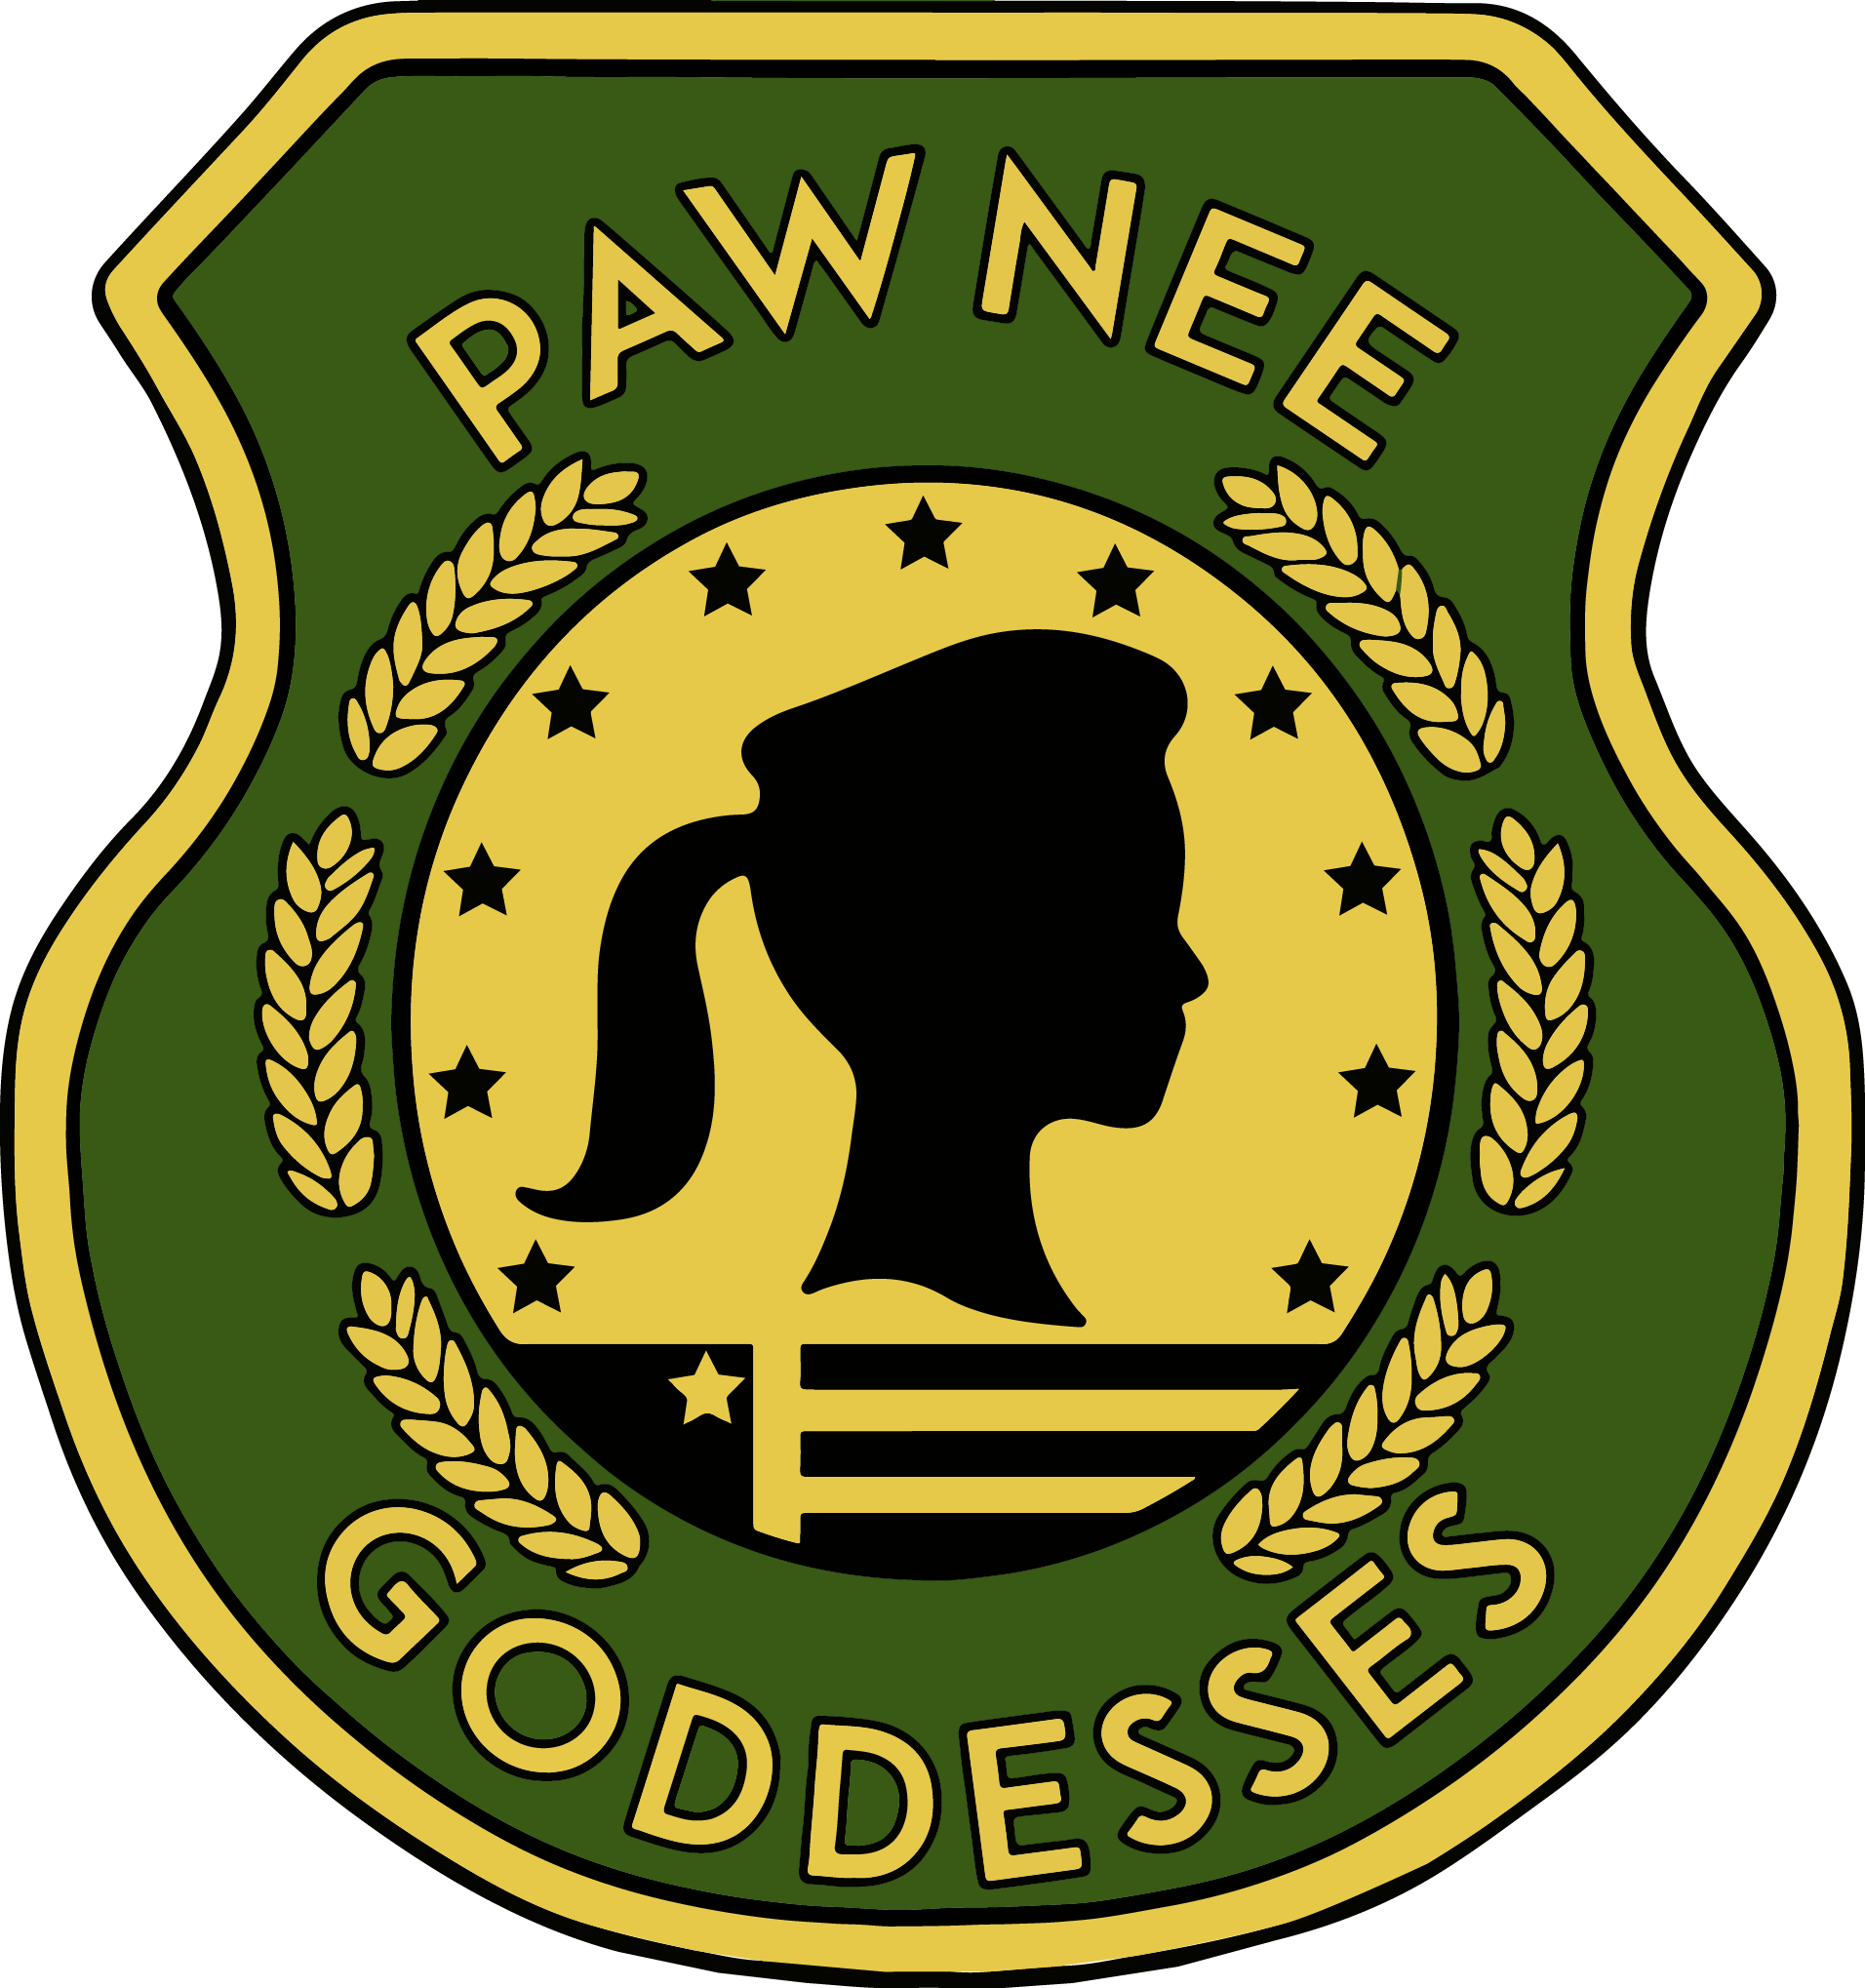 I'm Not Trying To Be Conceited* But It Looks Like They - Pawnee Goddesses Shirt (1912x2038)